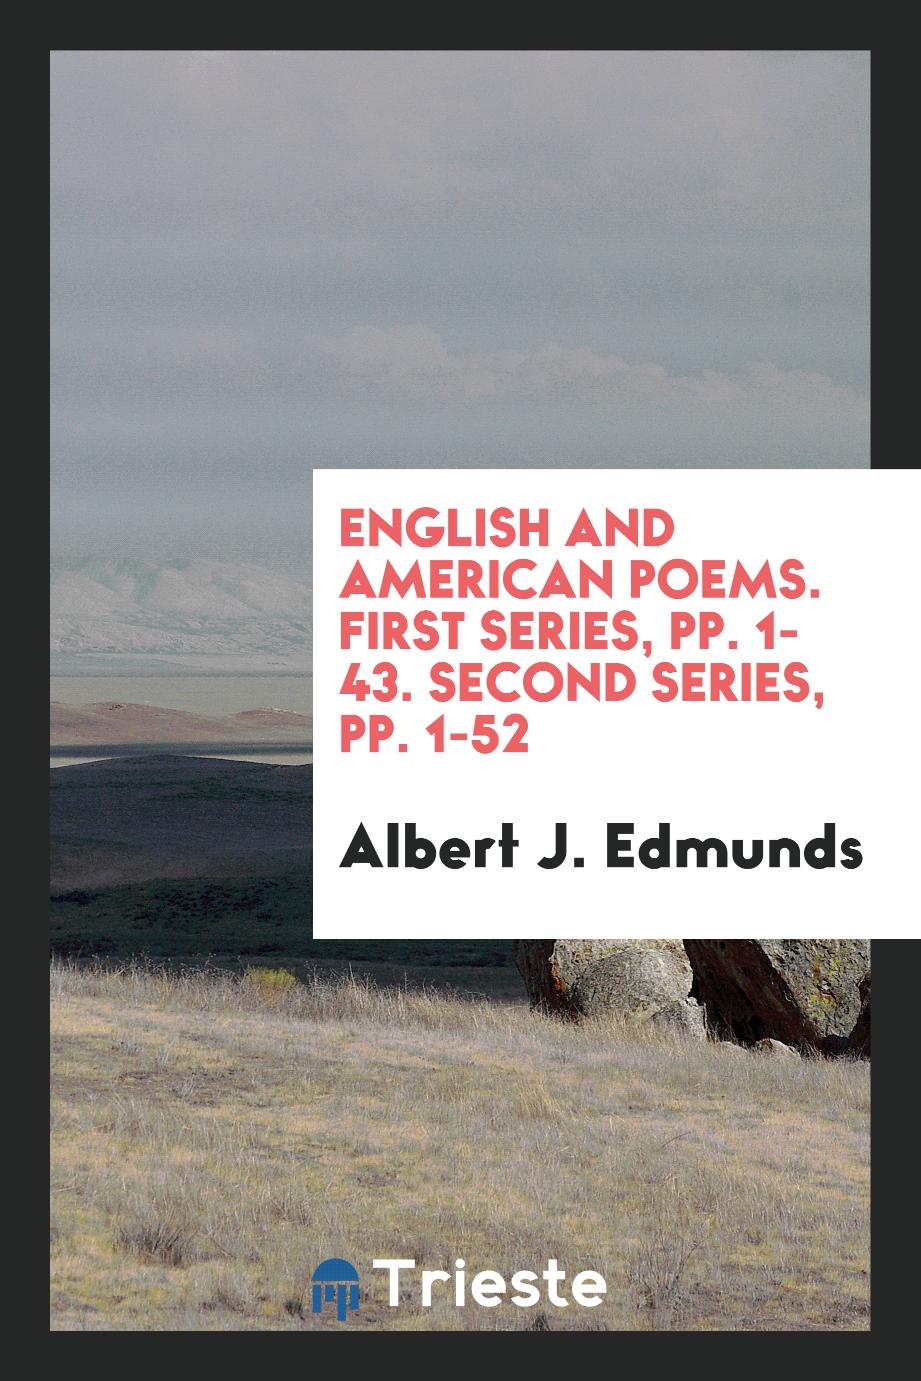 English and American Poems. First Series, pp. 1-43. Second Series, pp. 1-52